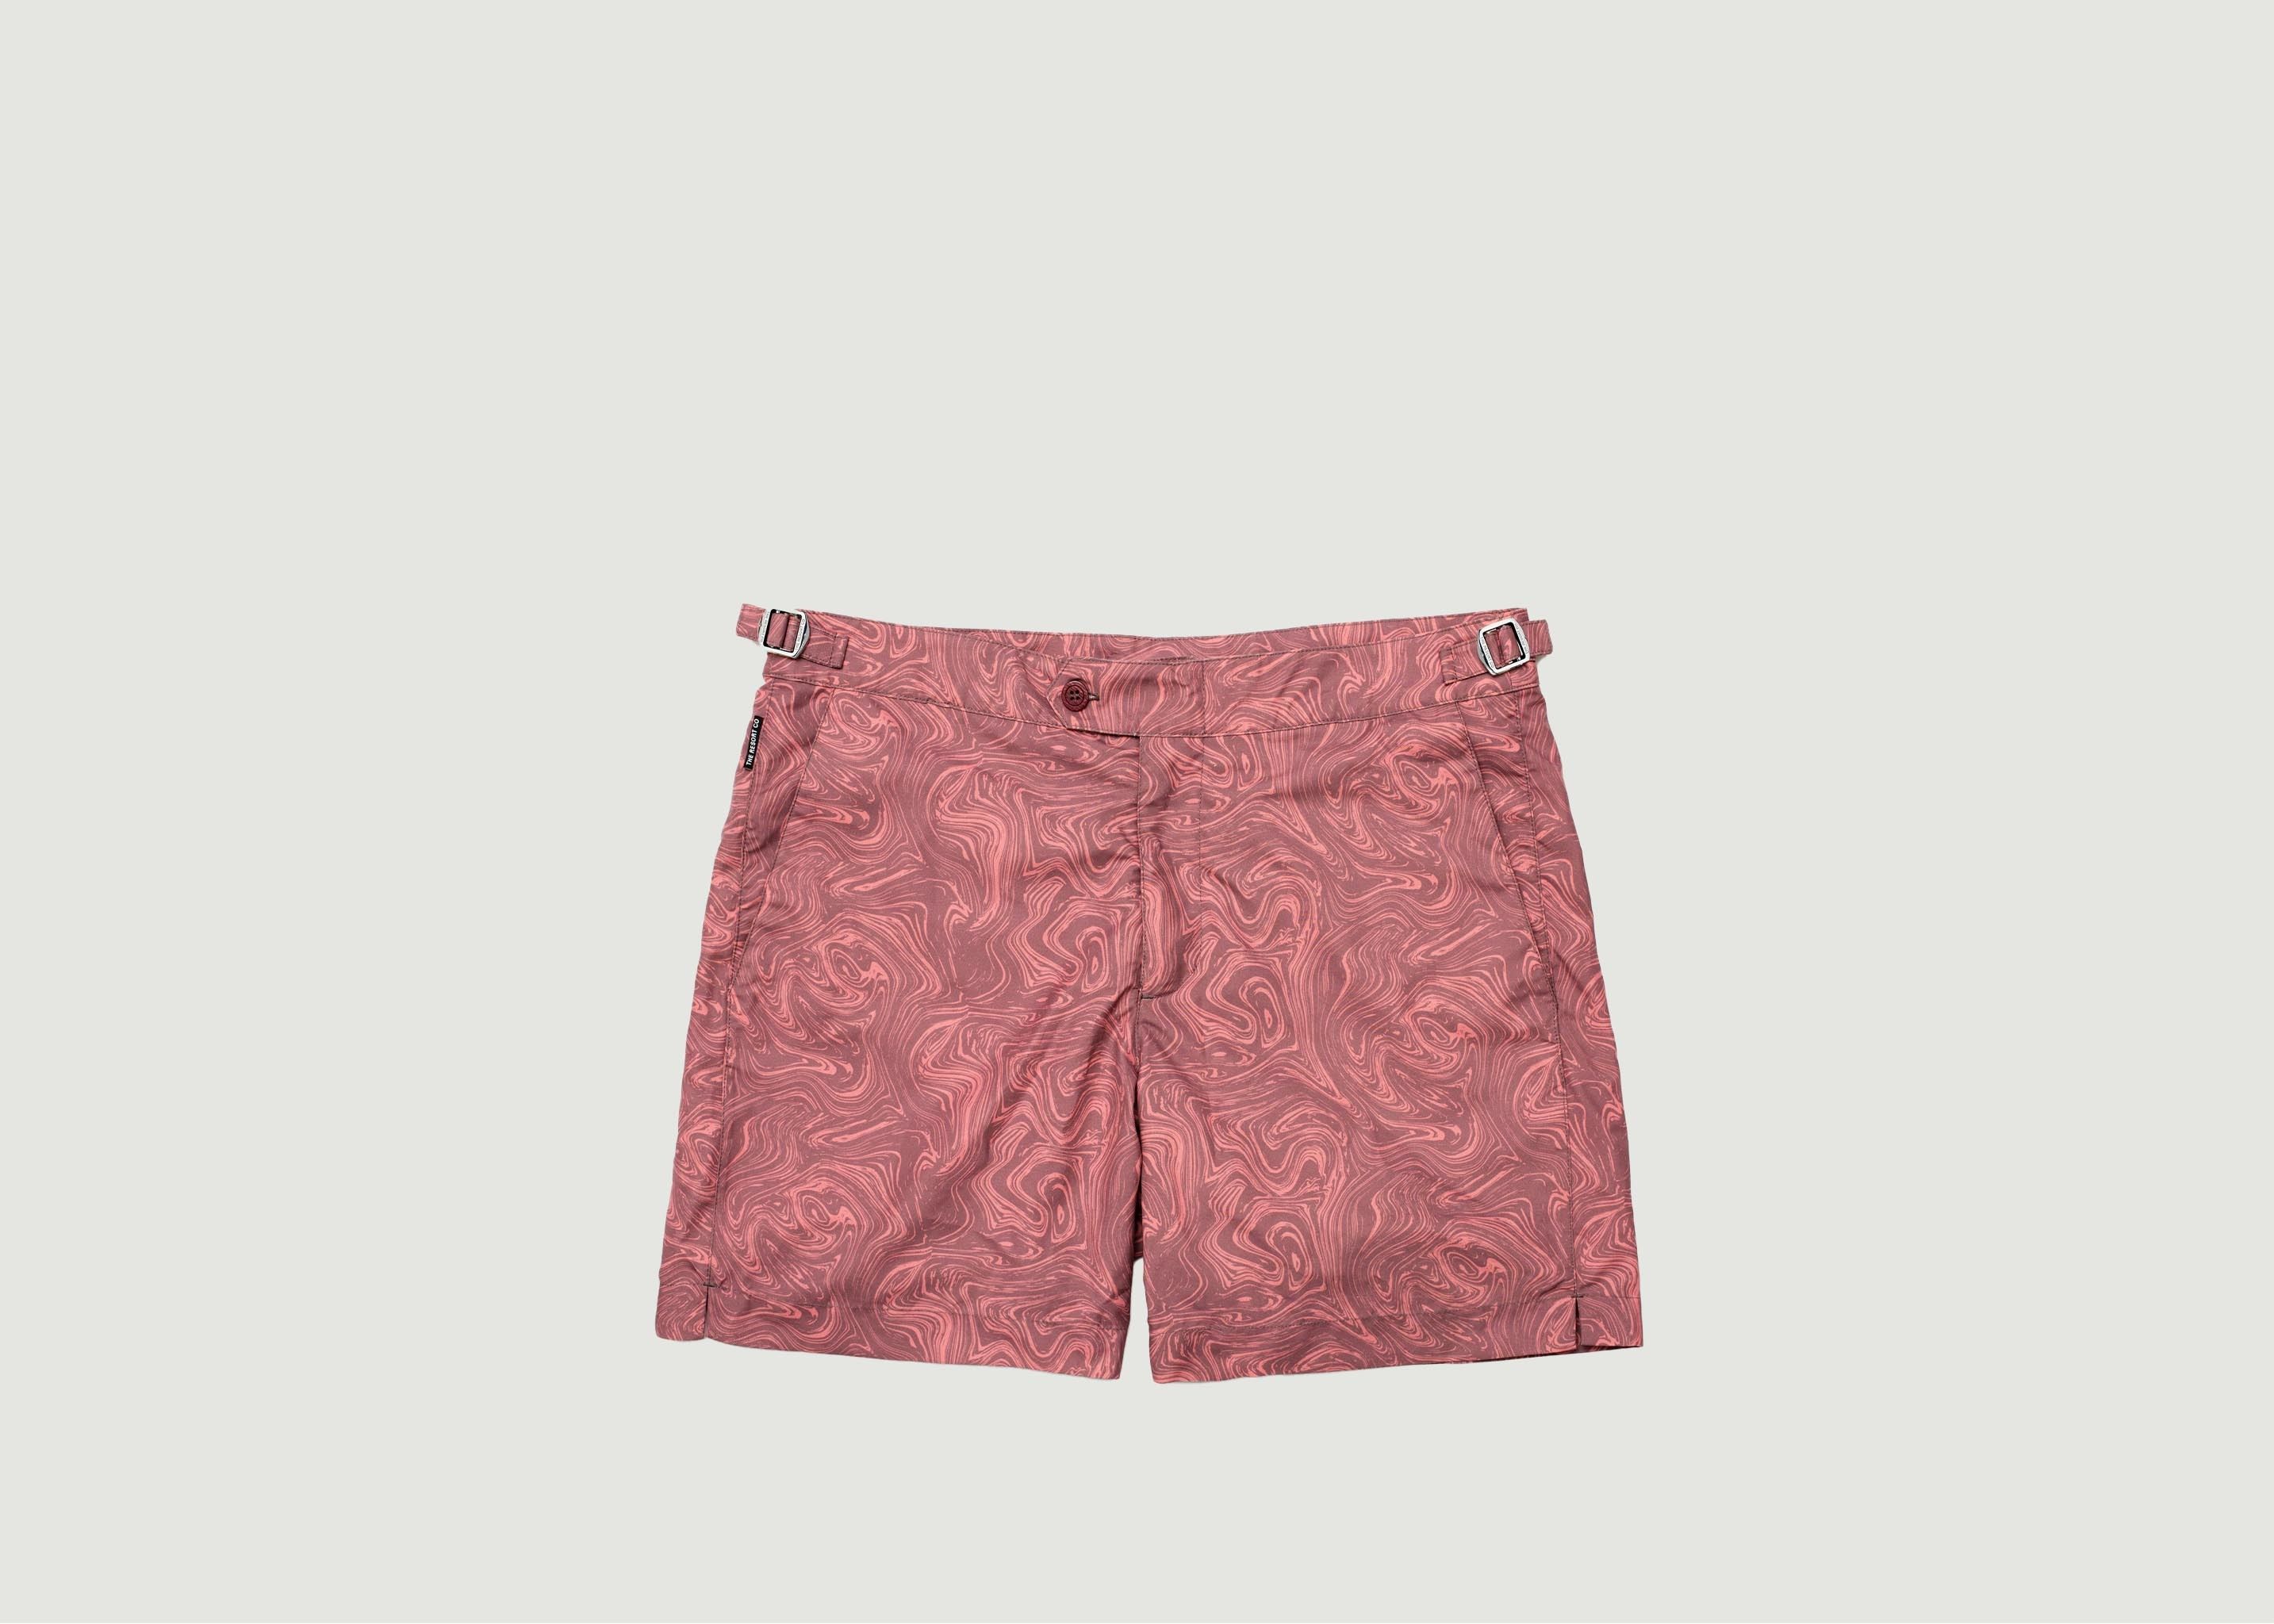 Bathing suit shorts - The Resort Co